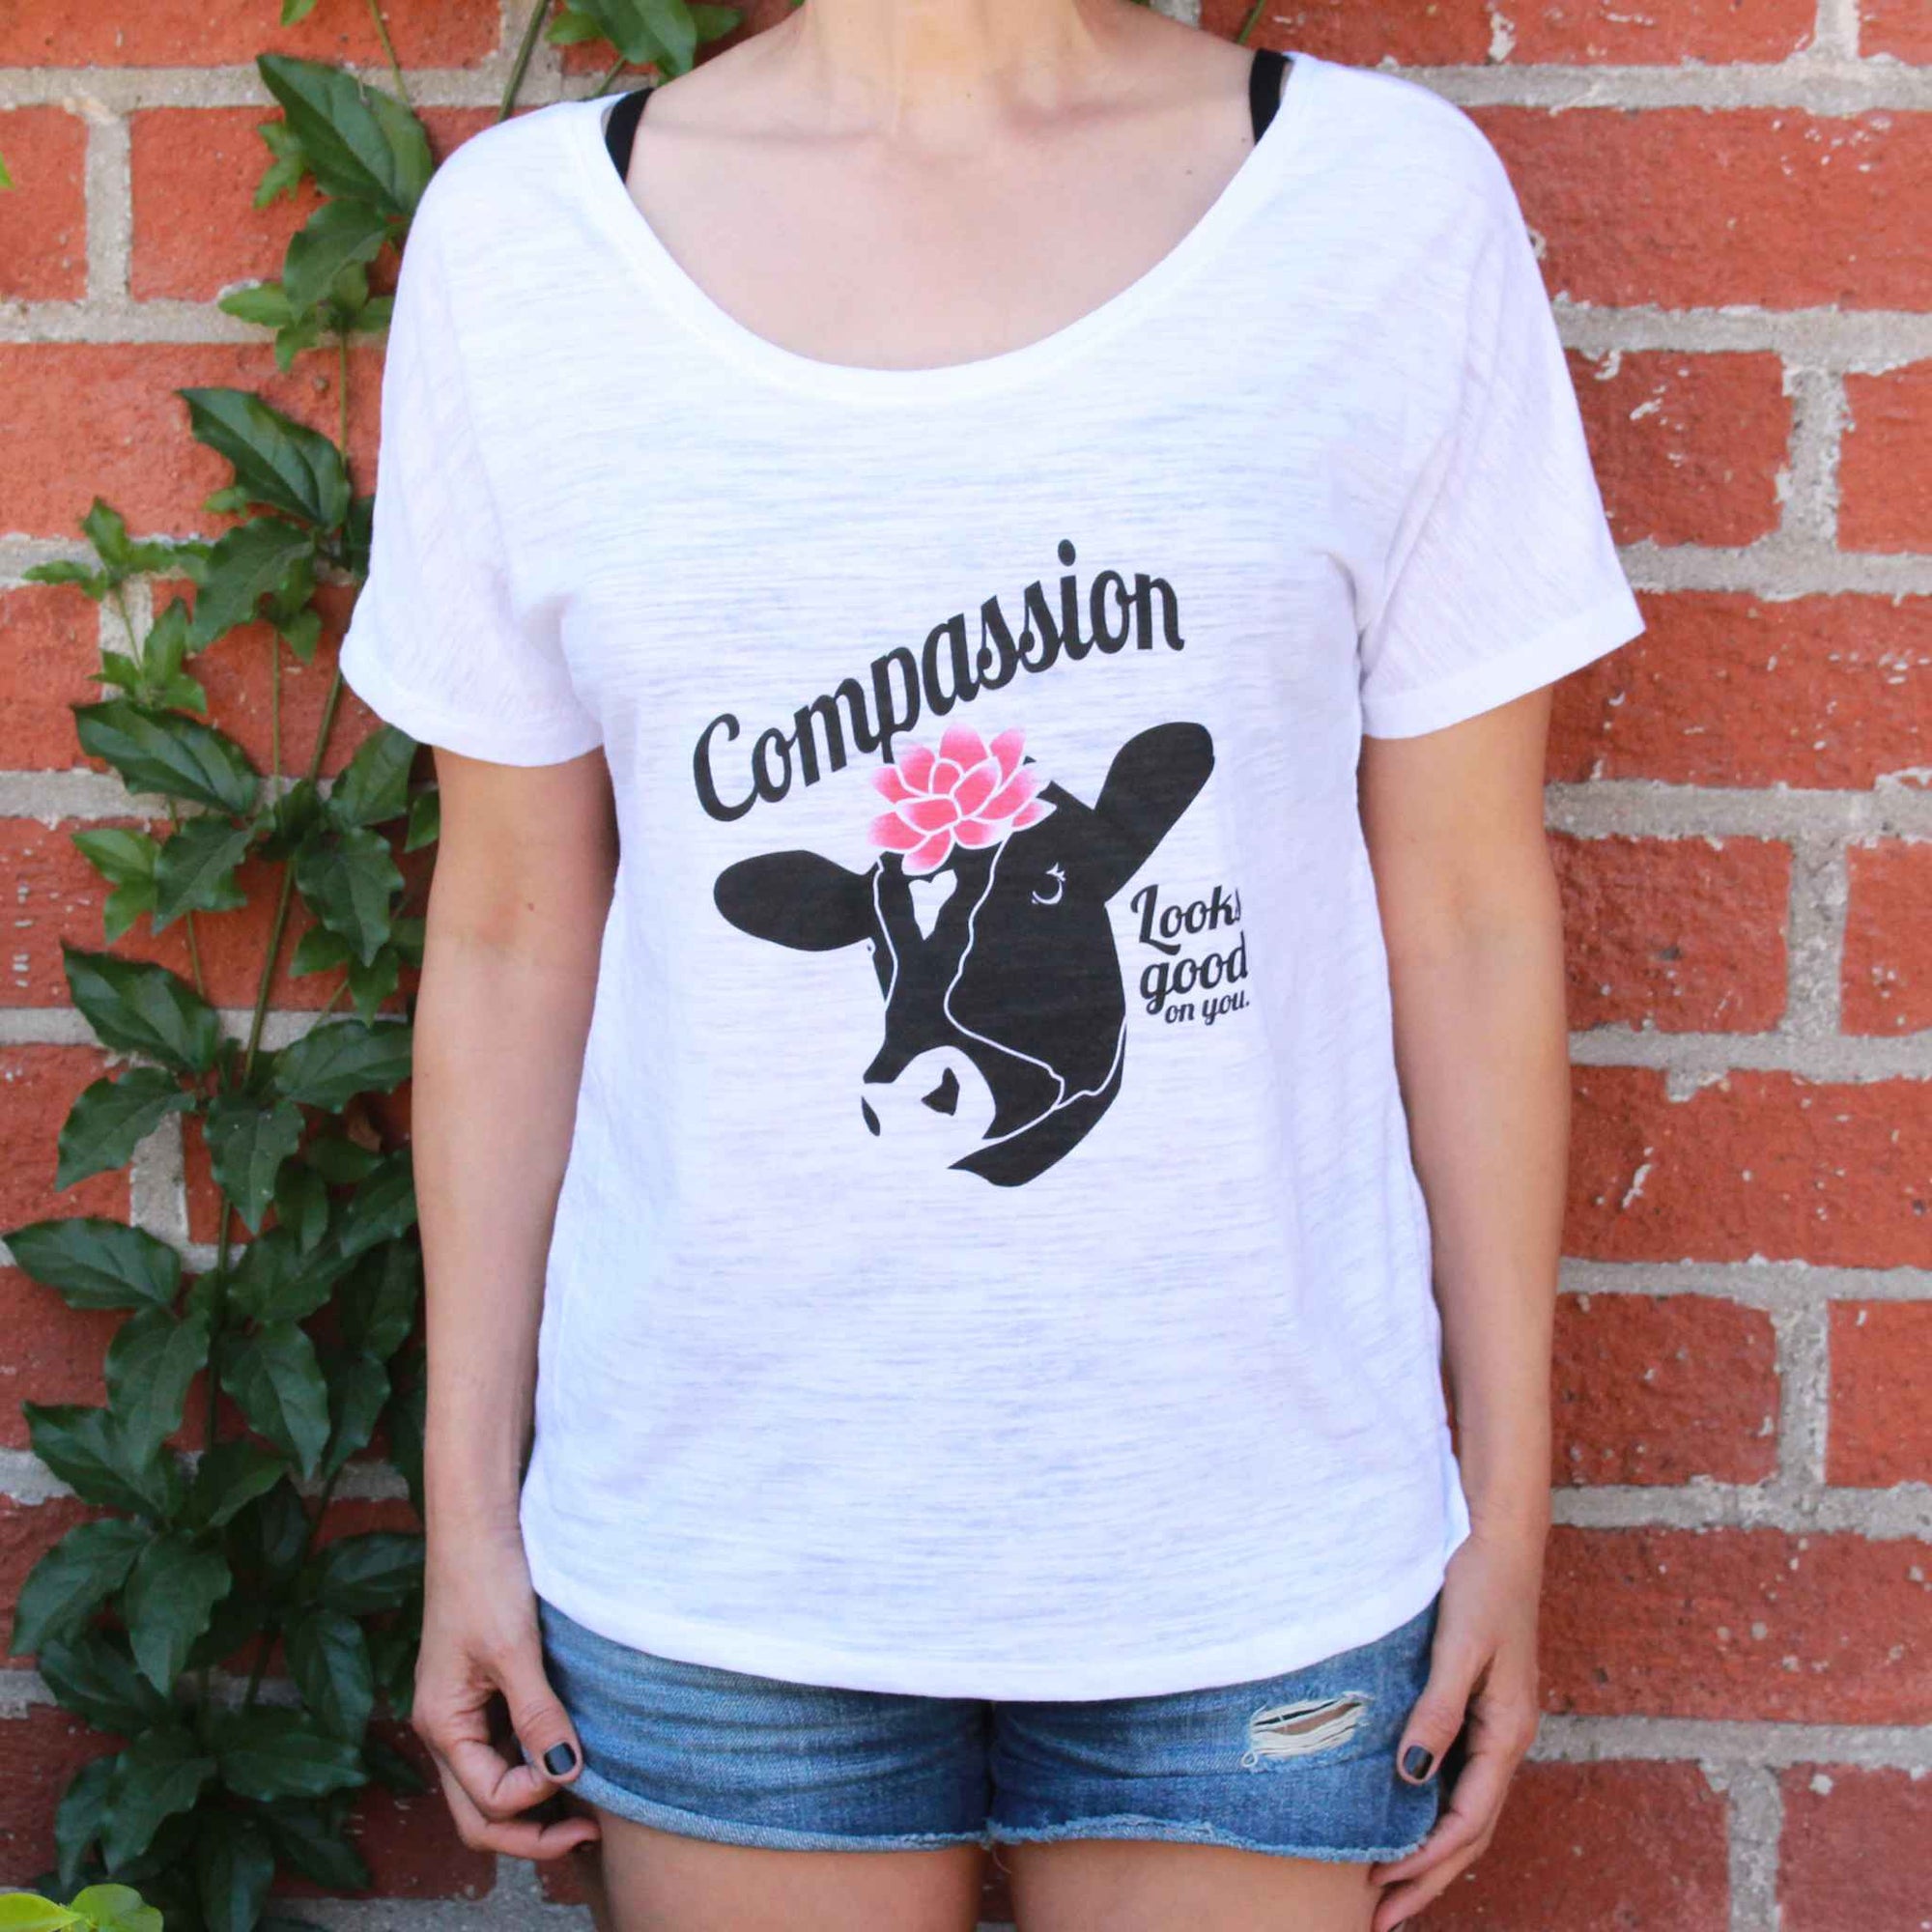 Compassion Looks Good On You - Slouchy Tee White